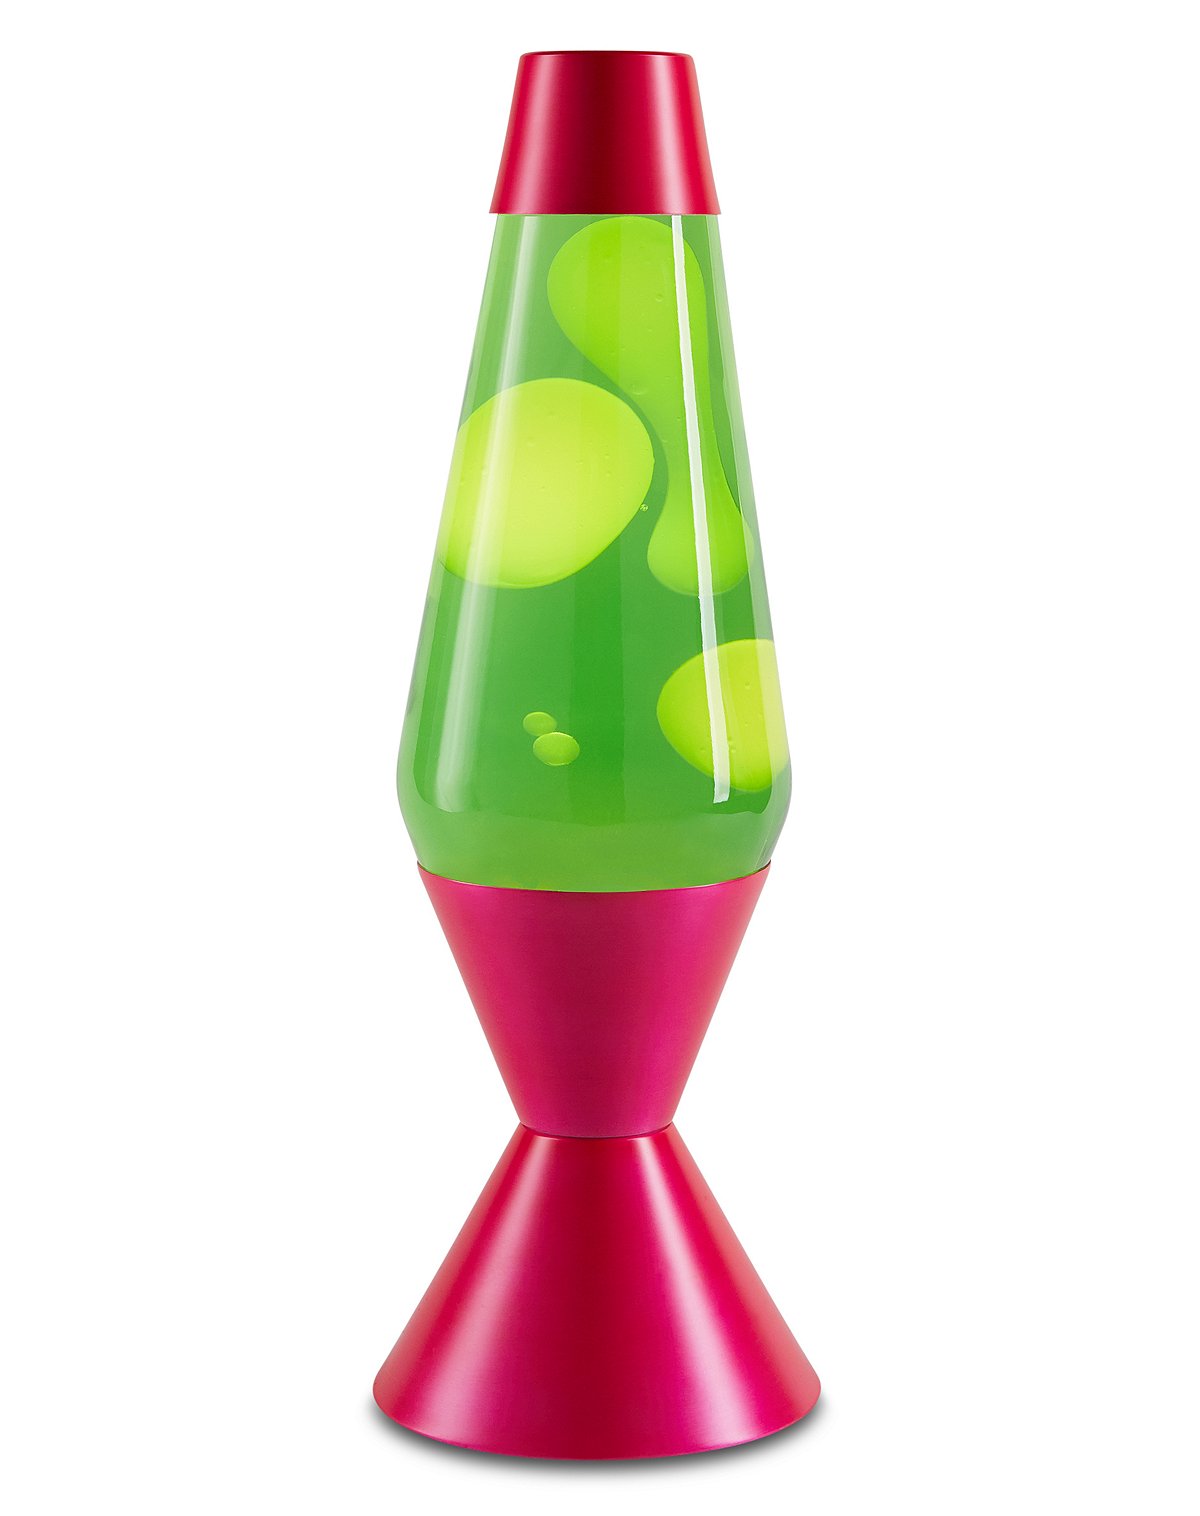 Neon Pink and Green Black Light Lava Lamp